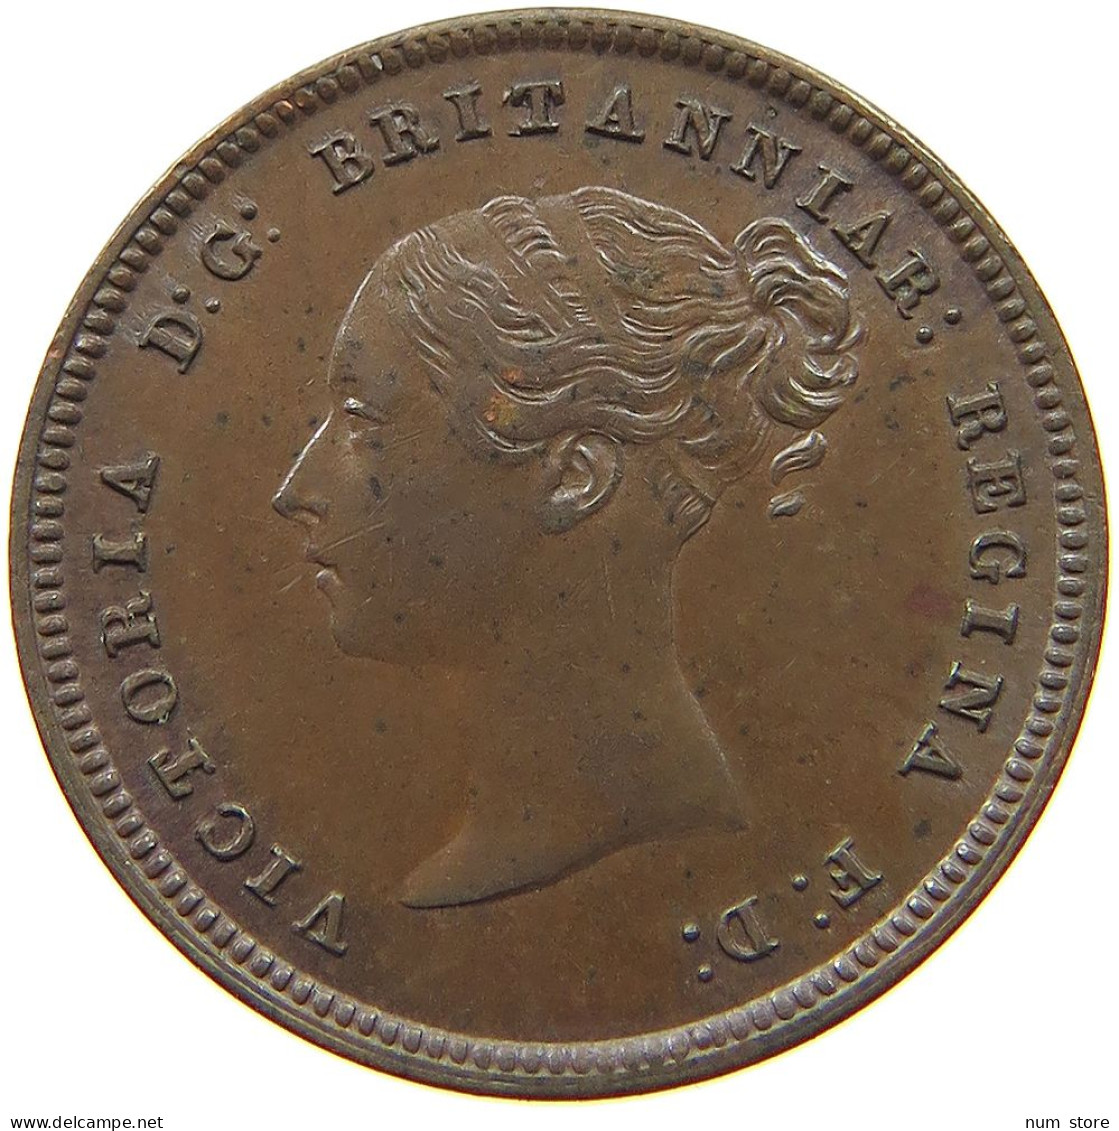 GREAT BRITAIN HALF FARTHING 1844 Victoria 1837-1901 #t107 0199 - A. 1/4 - 1/3 - 1/2 Farthing